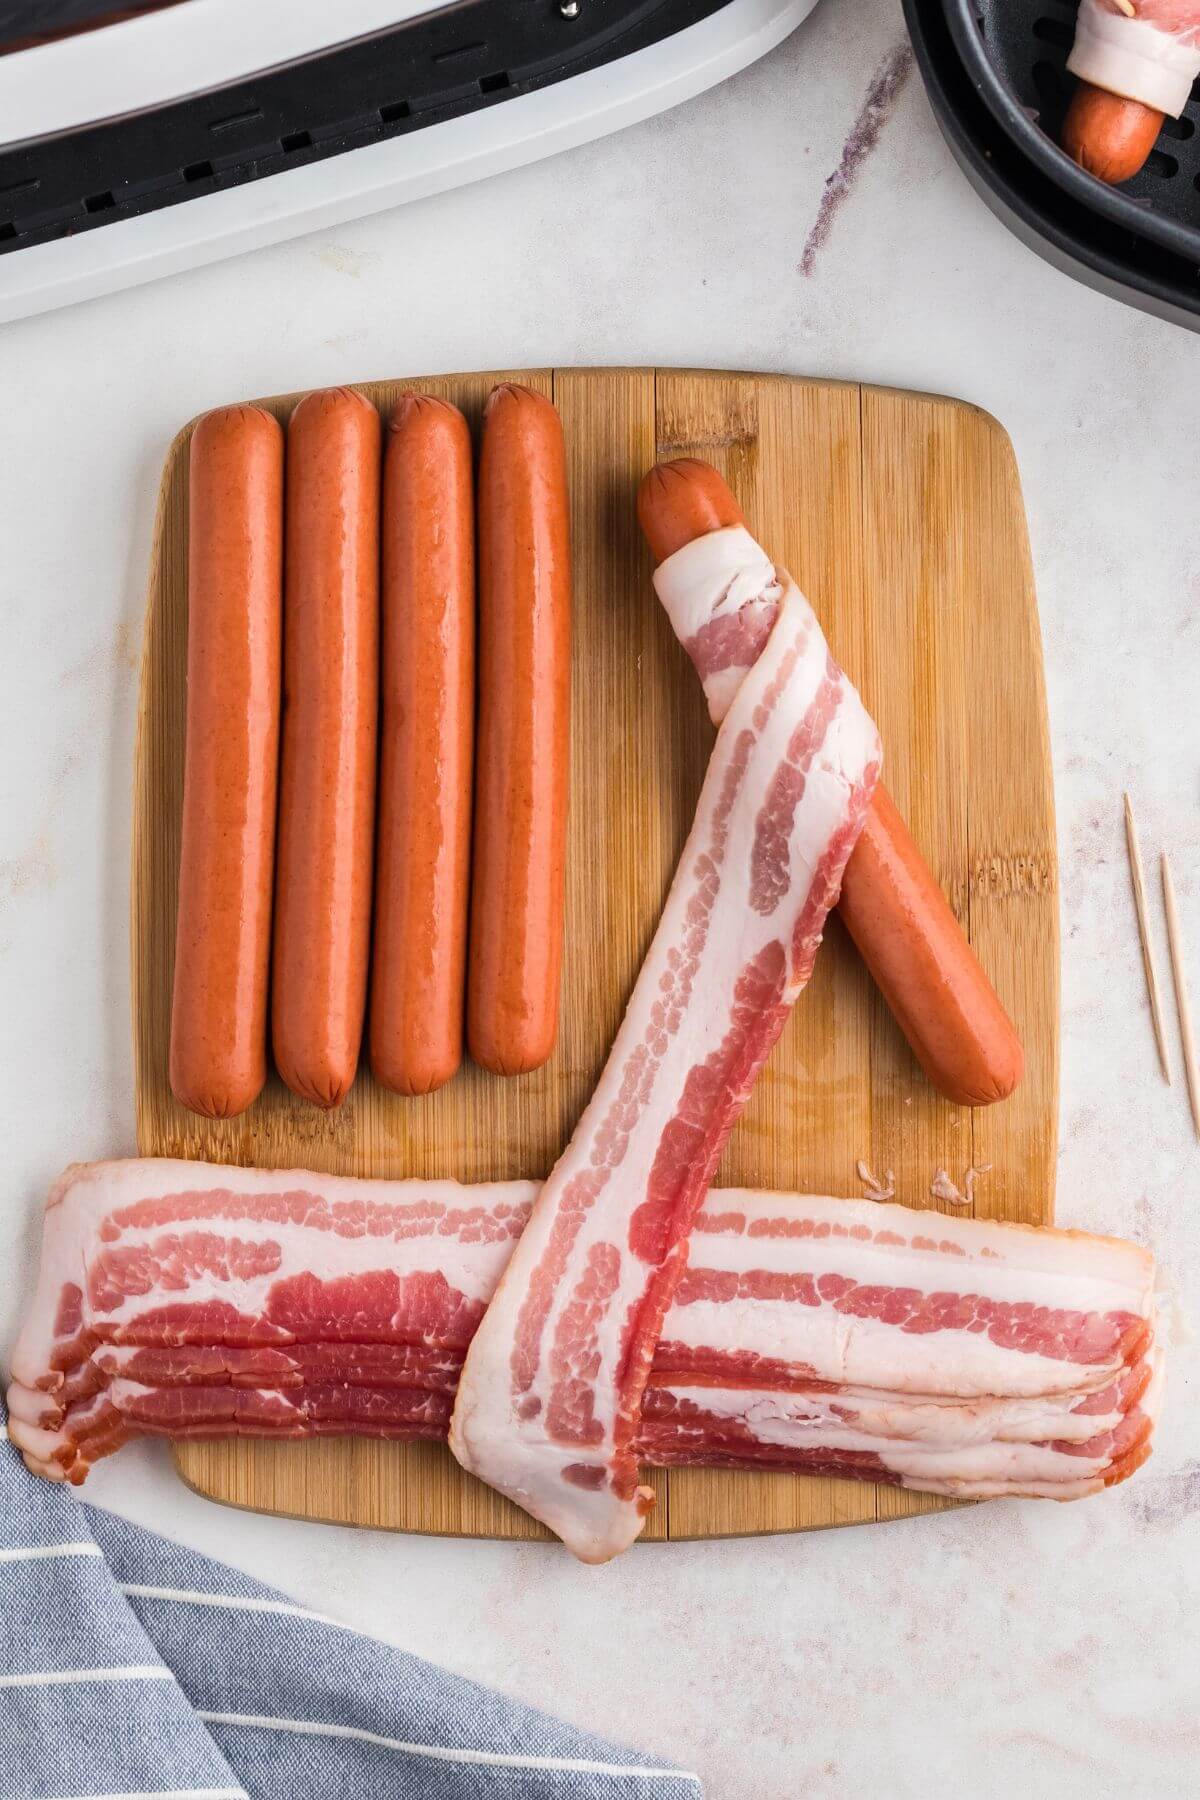 Strip of uncooked bacon wrapped around uncooked hot dog on a wooden cutting board. 